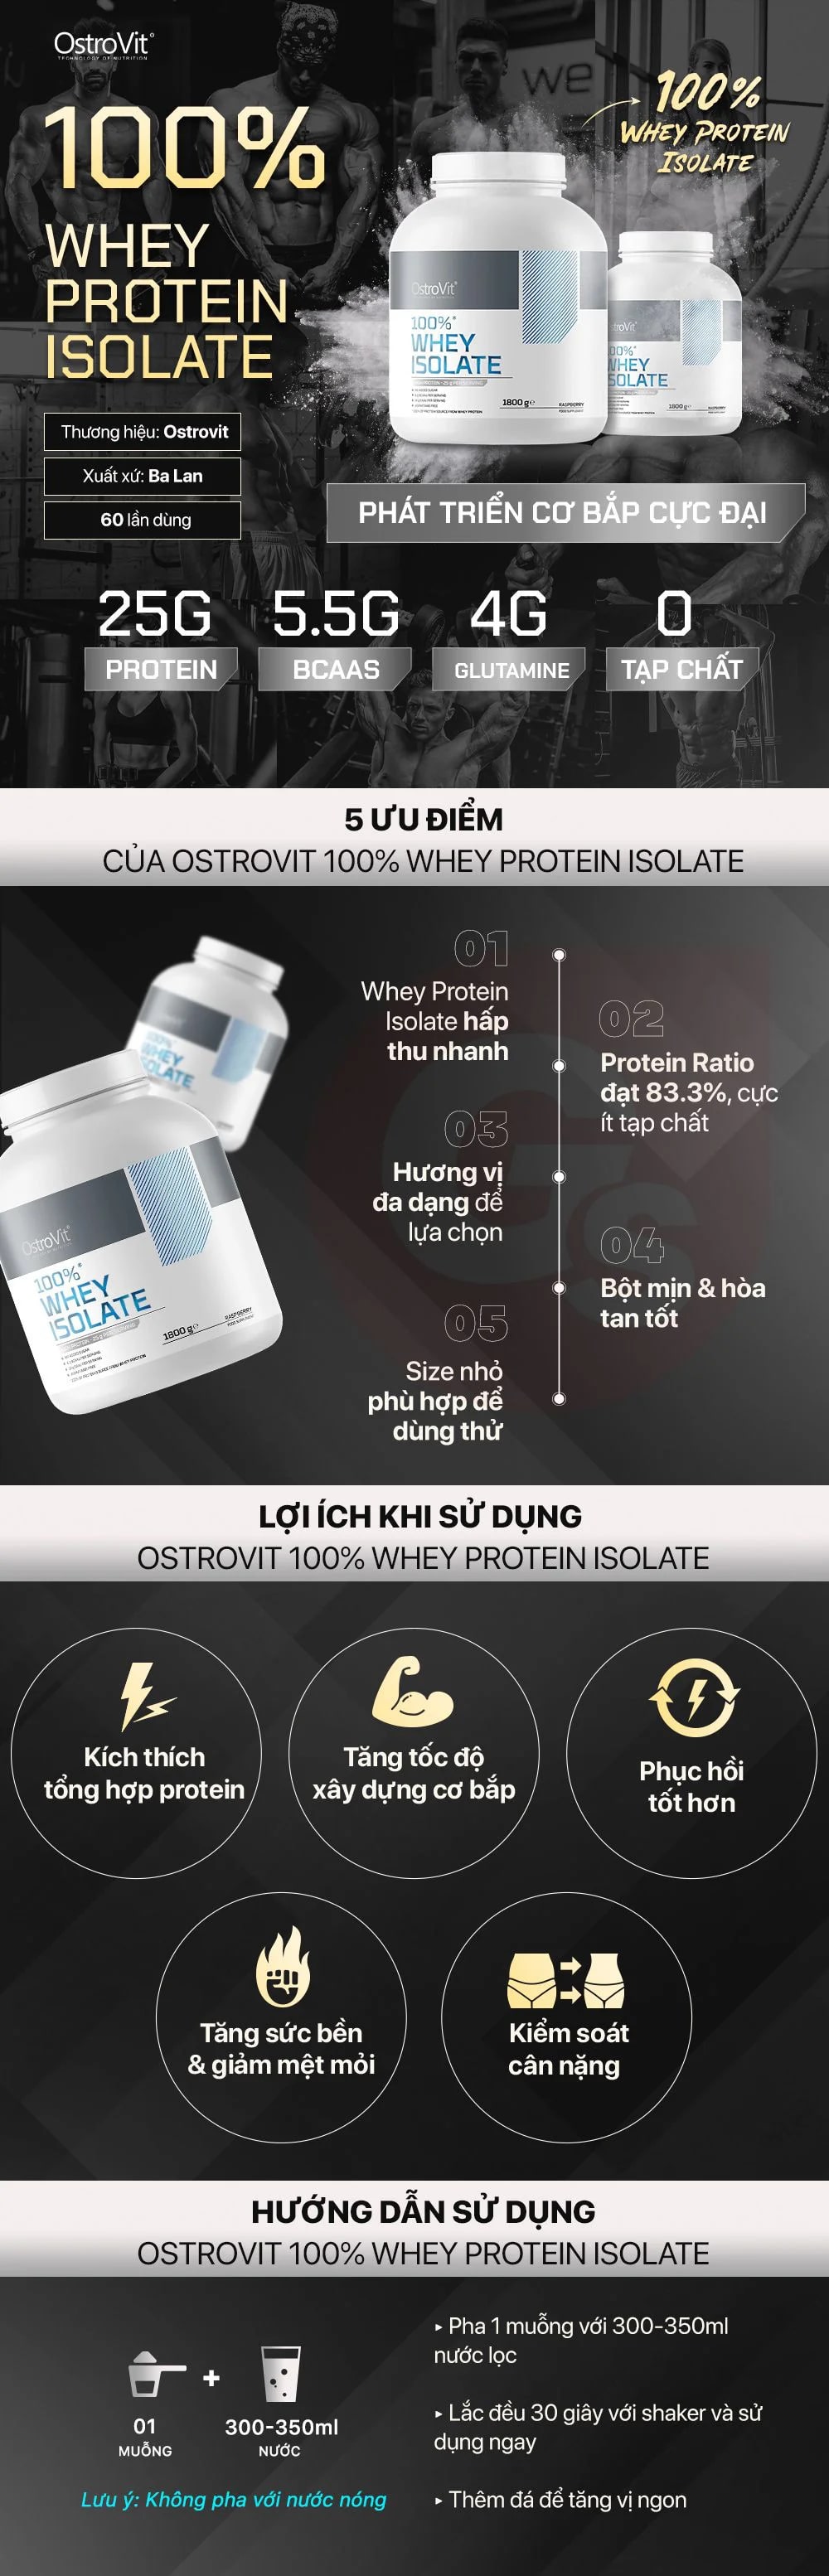 review-danh-gia-ostrovit-whey-protein-isolate-gymstore-2